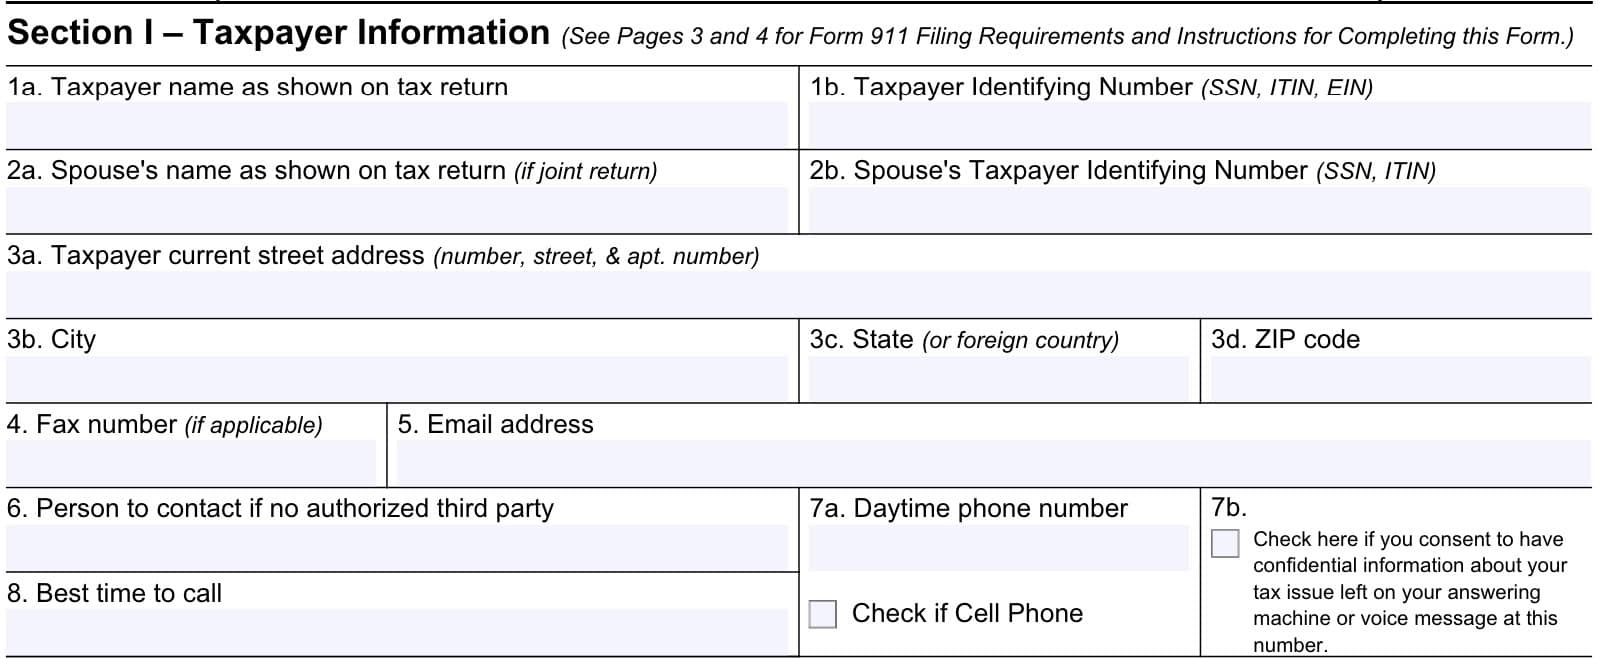 irs form 911, section i: taxpayer information